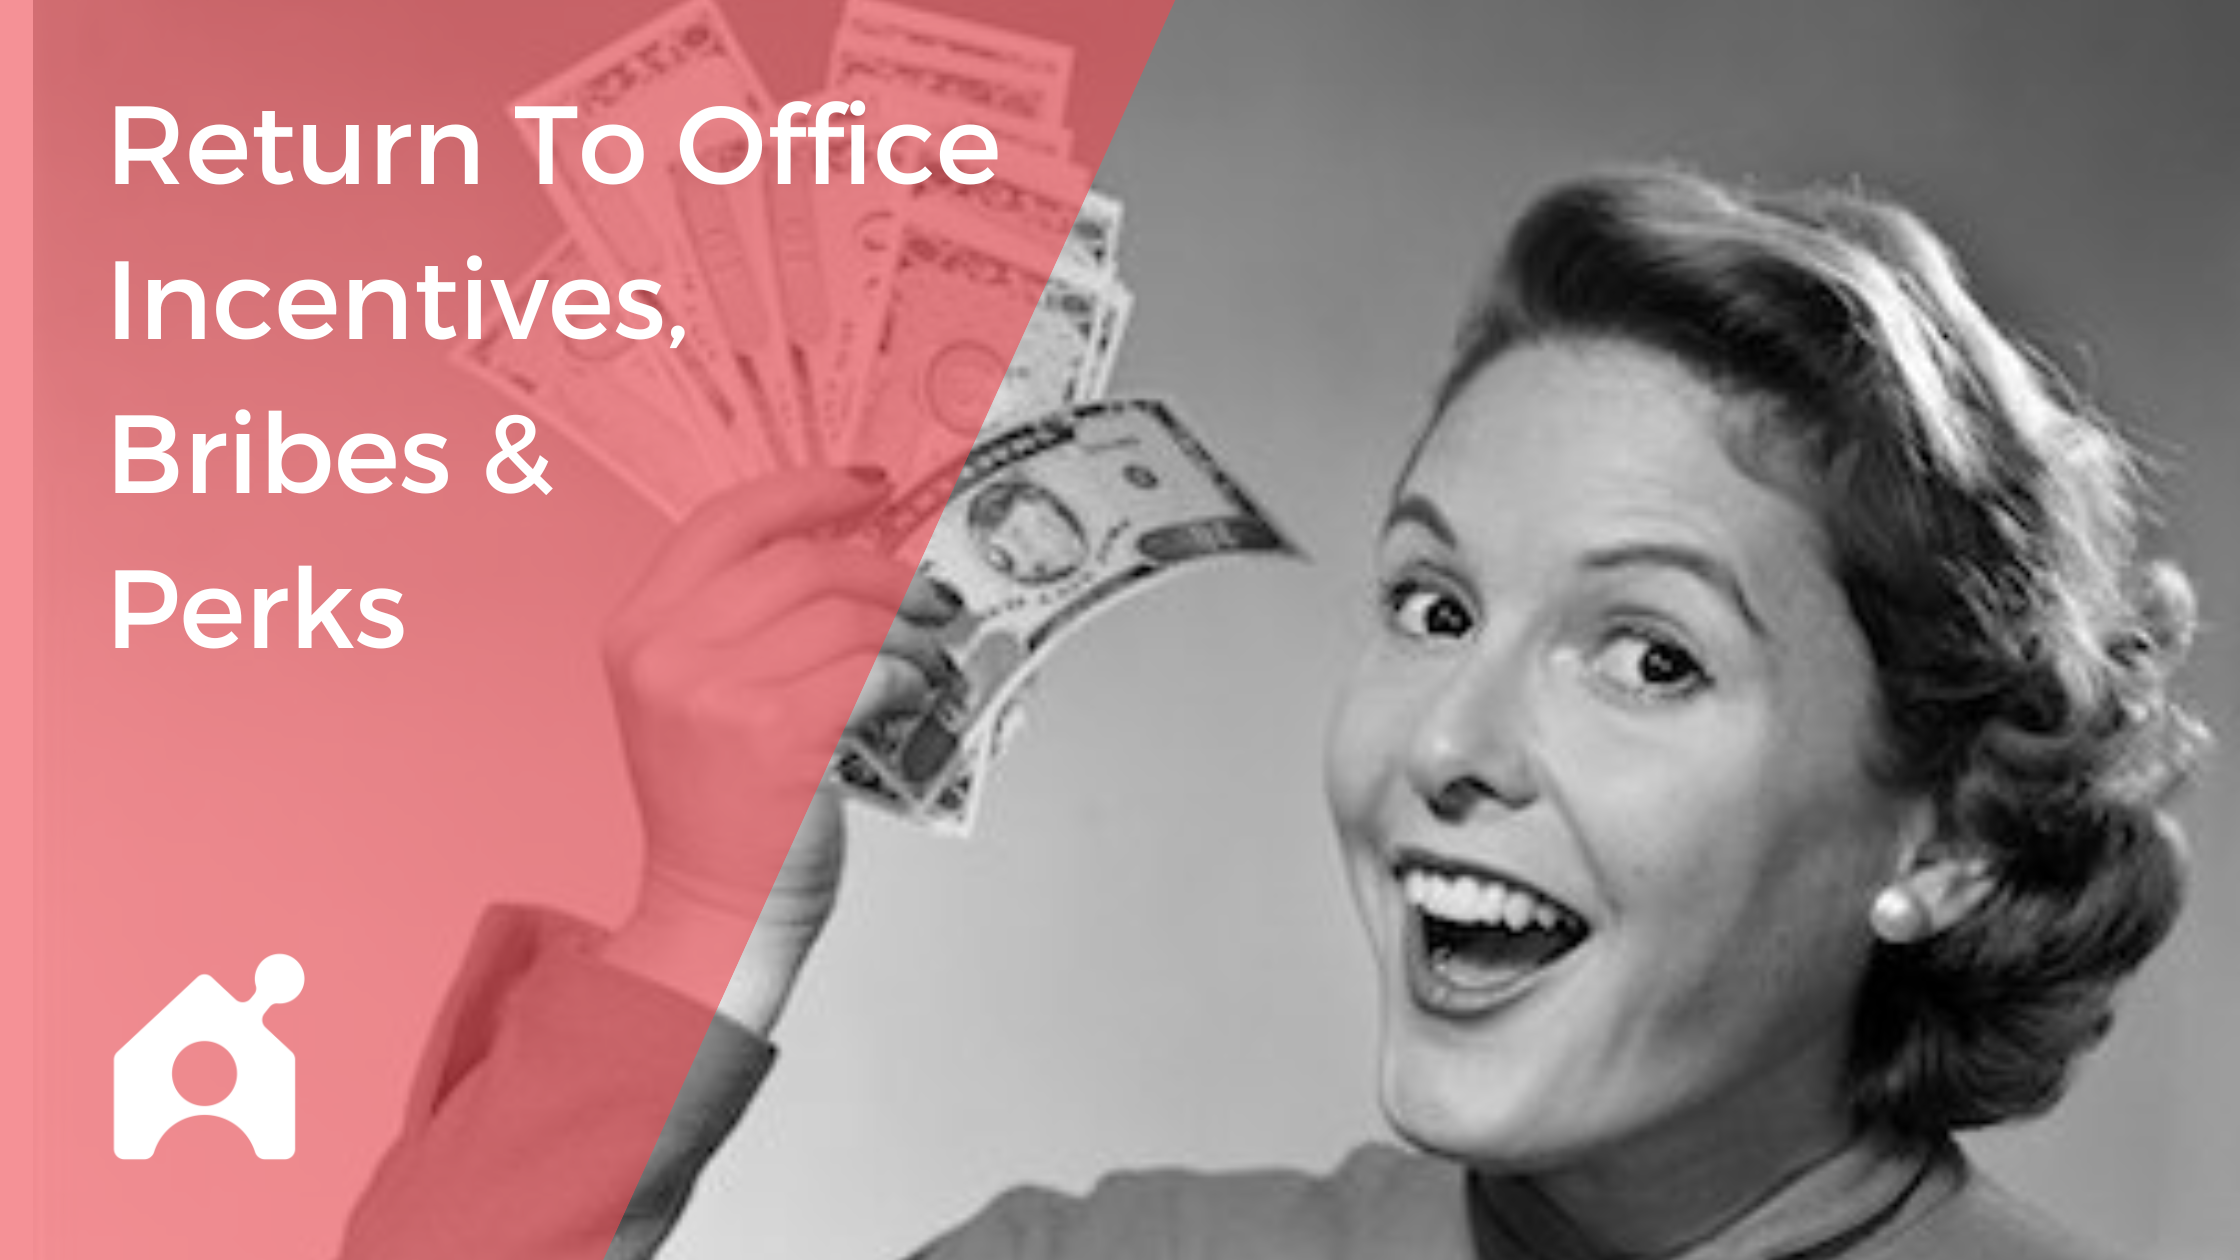 Return To Office Incentives